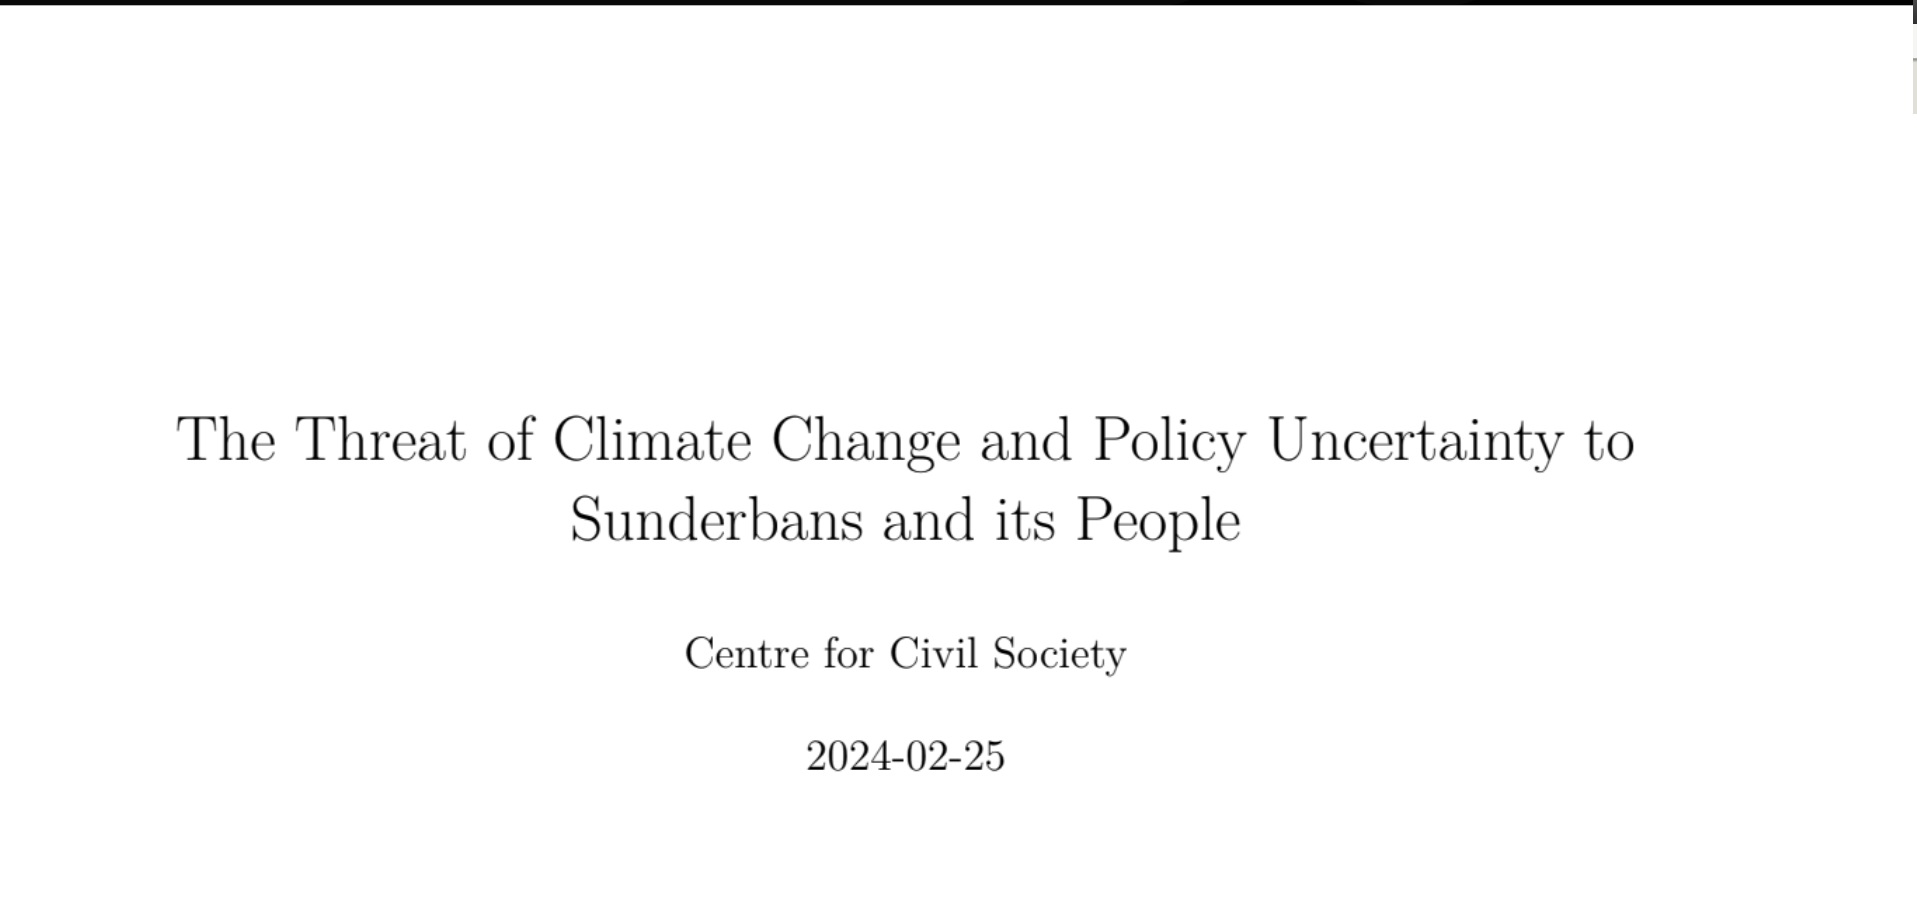 West Bengal Inland Fisheries Act 1984, Climate Change and the Sundarbans people